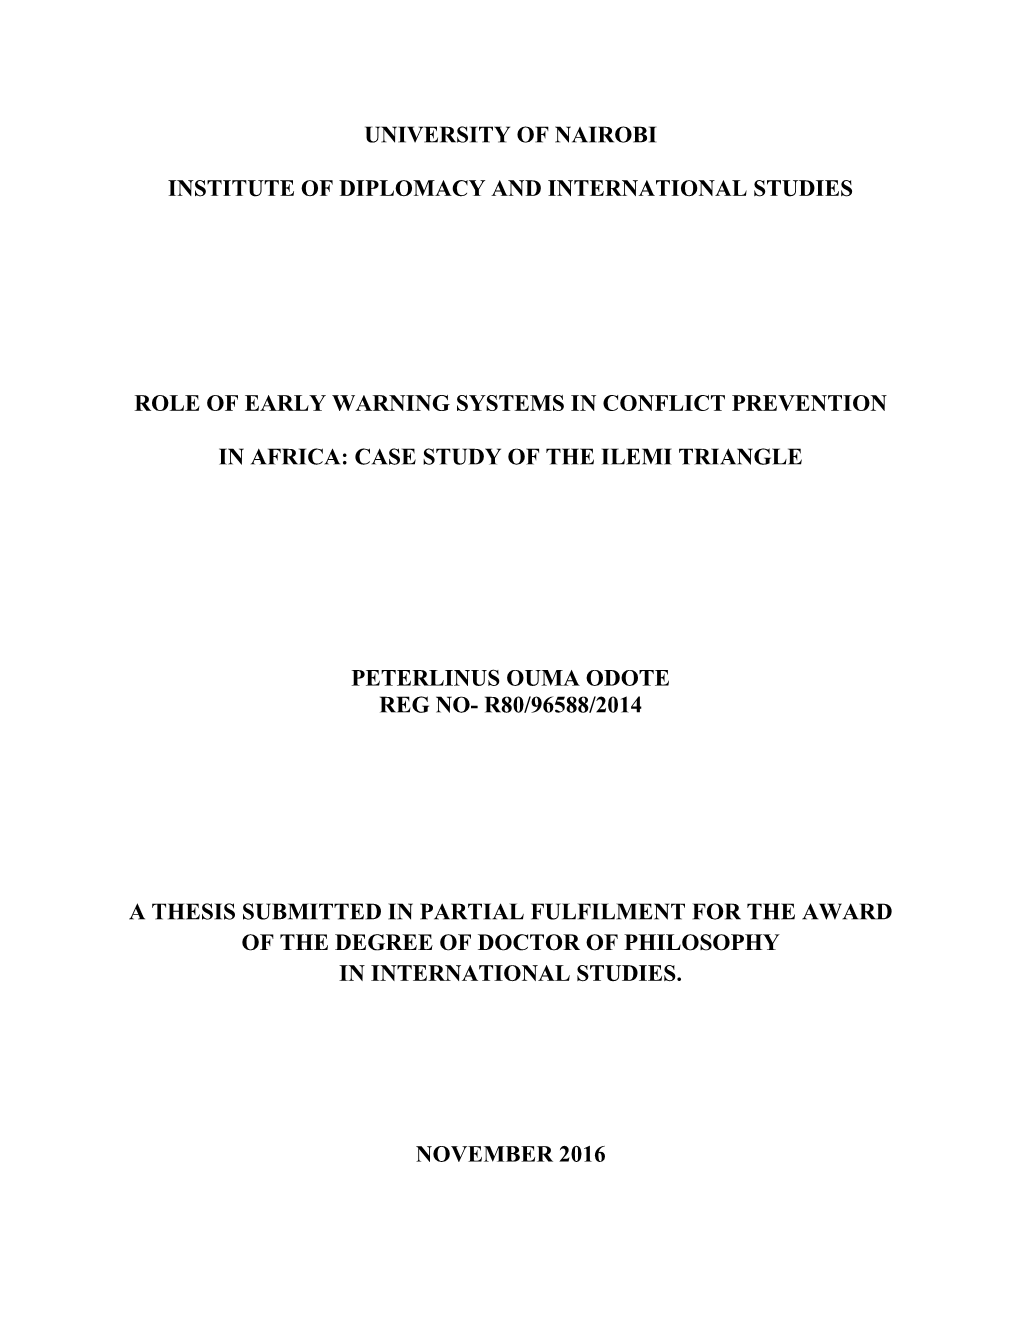 Role of Early Warning Systems in Conflict Prevention in Africa: Case